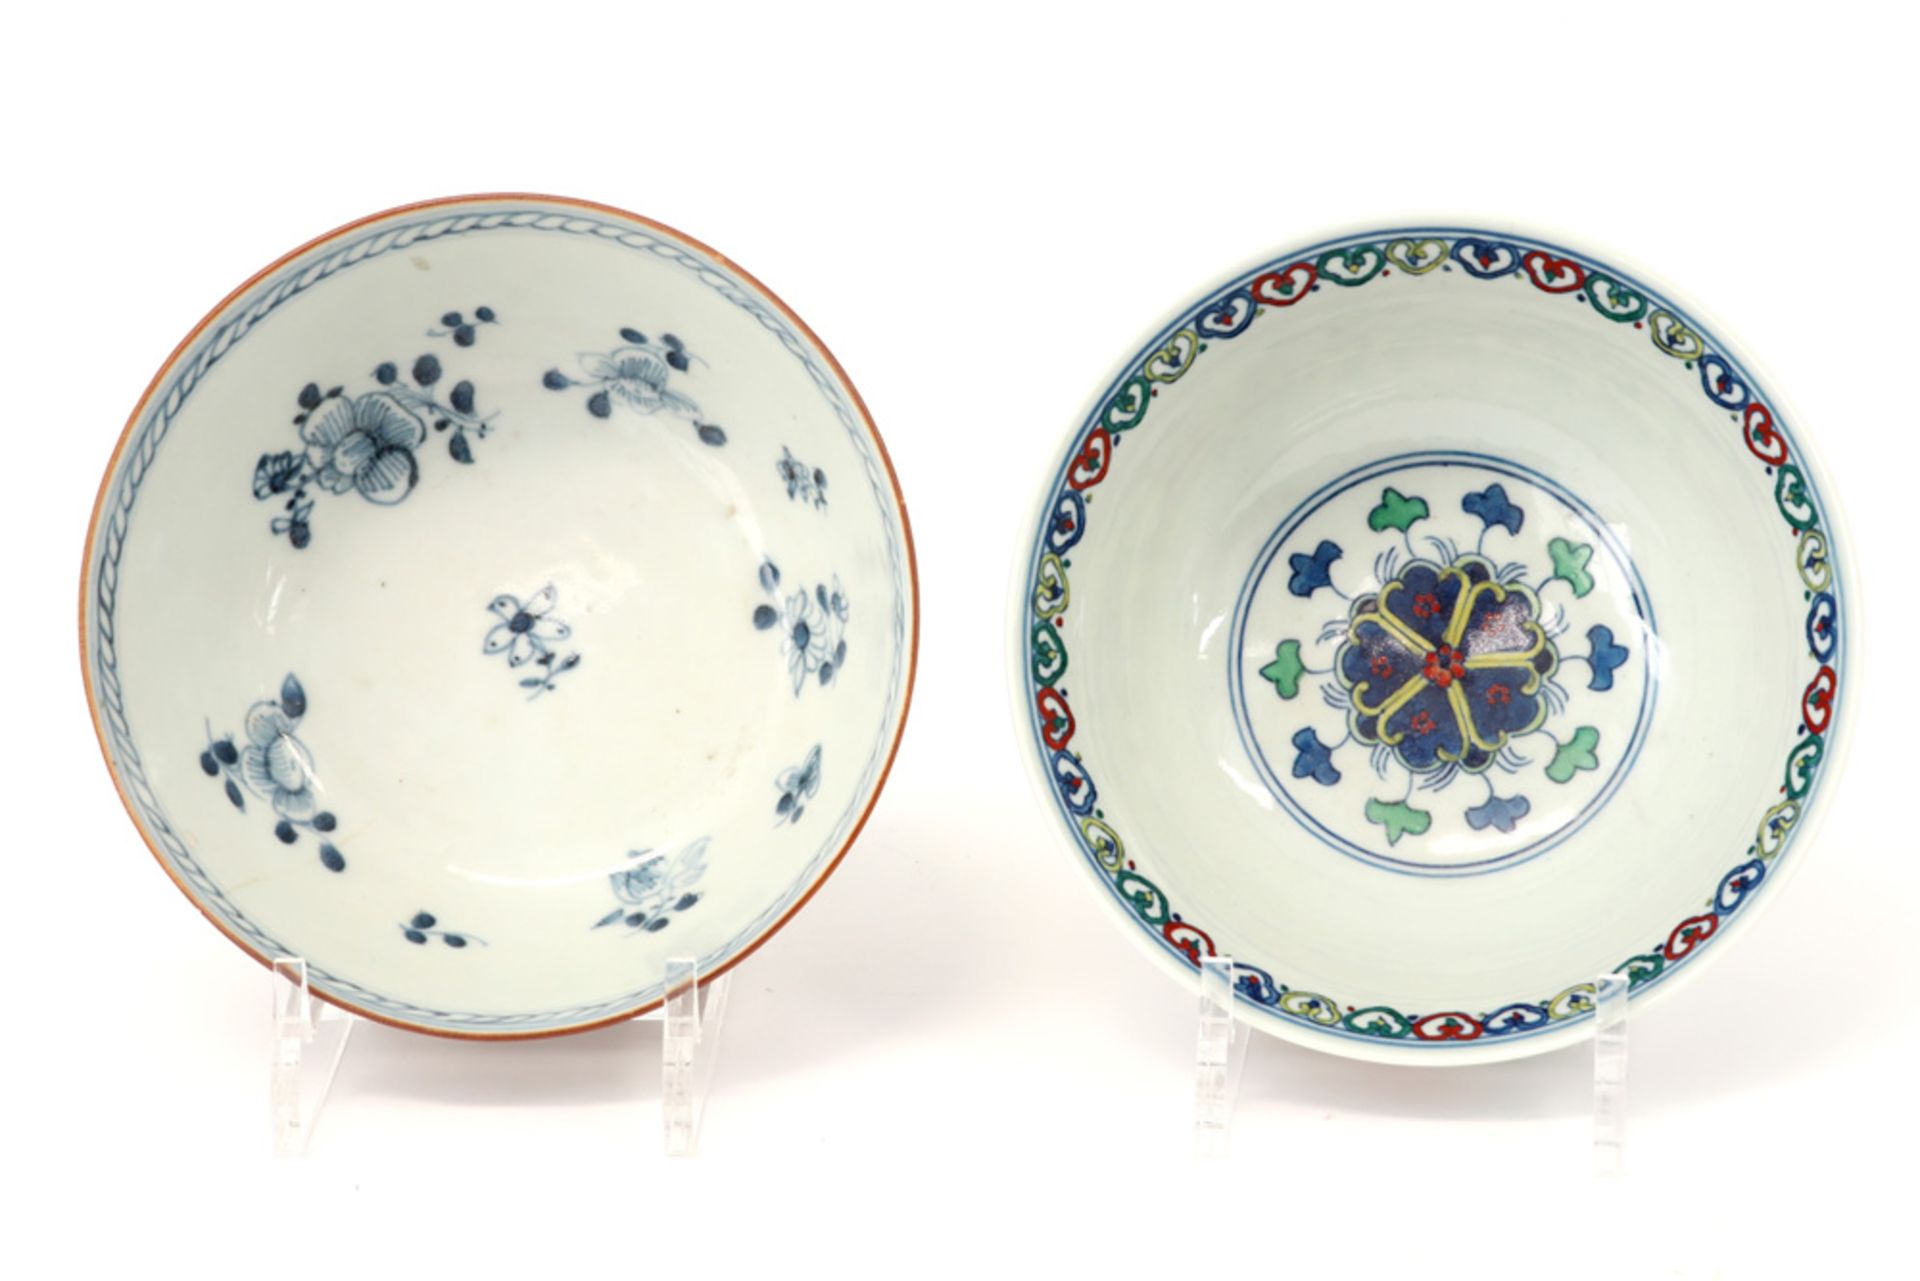 two Chinese bowls : an 18th Cent. Capucin one with blue-white and another with a polychrome - Image 2 of 3